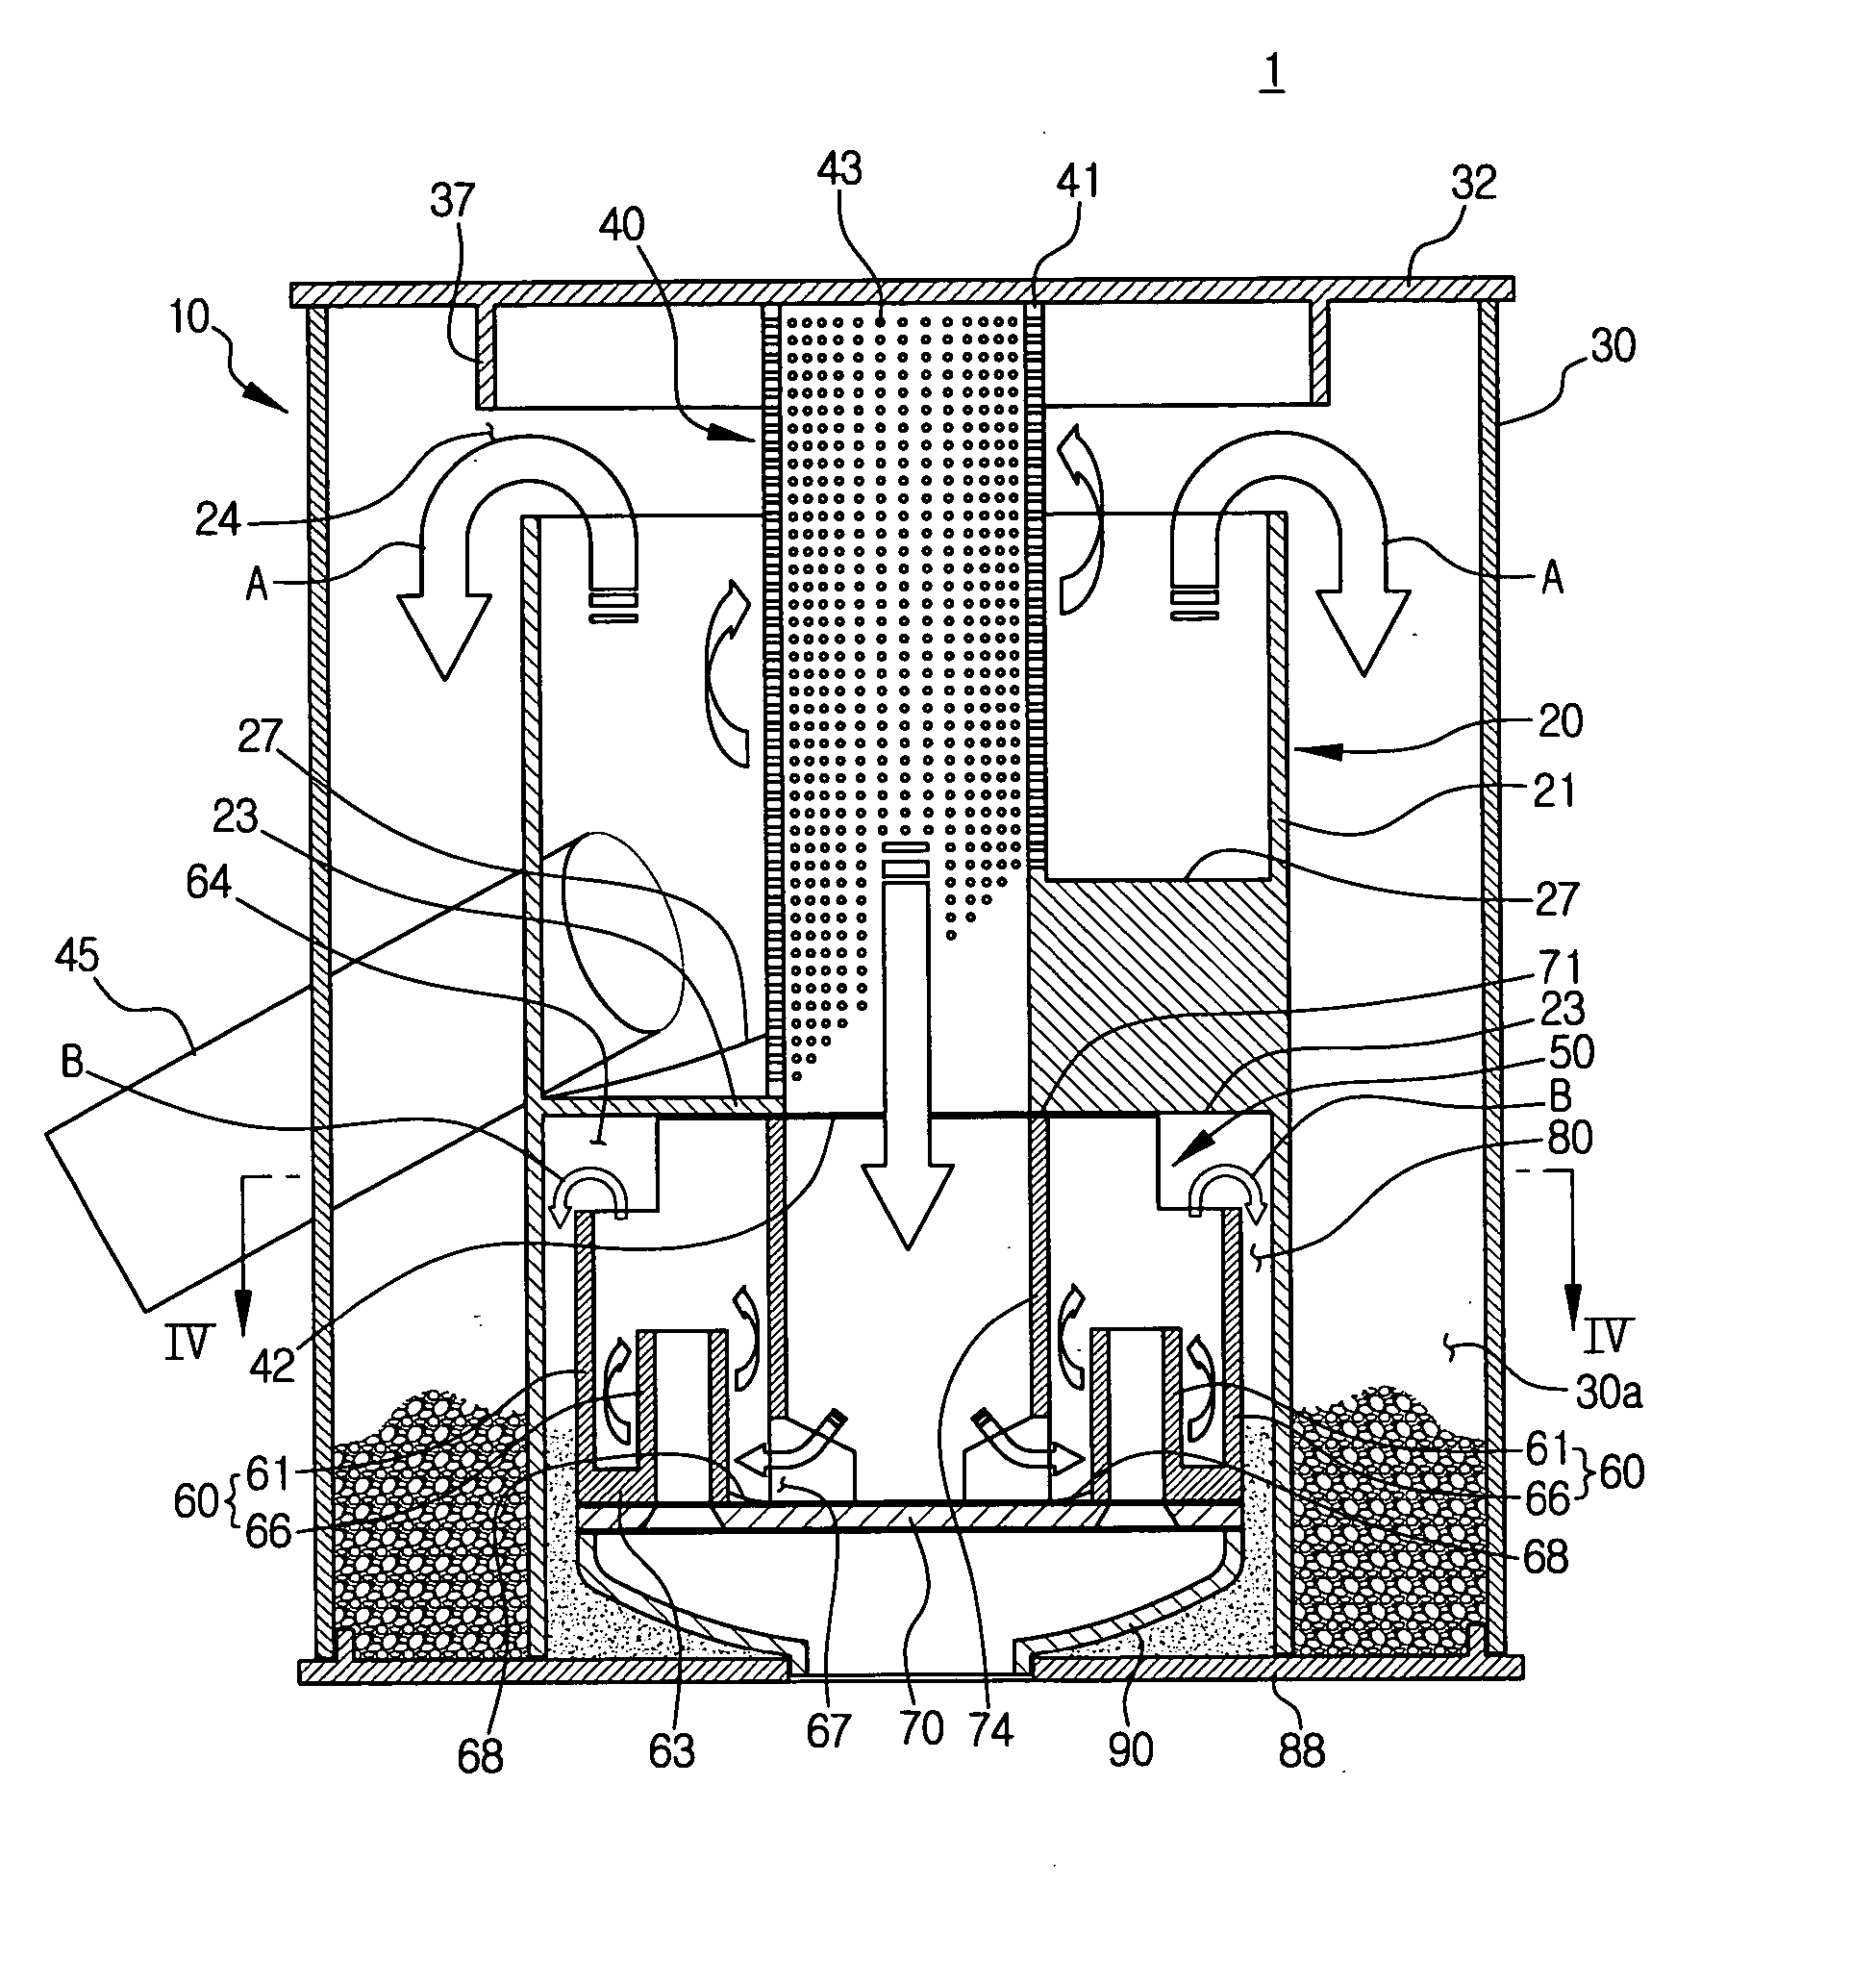 Multi-cyclone dust collector for vacuum cleaner and vacuum cleaner employing the same